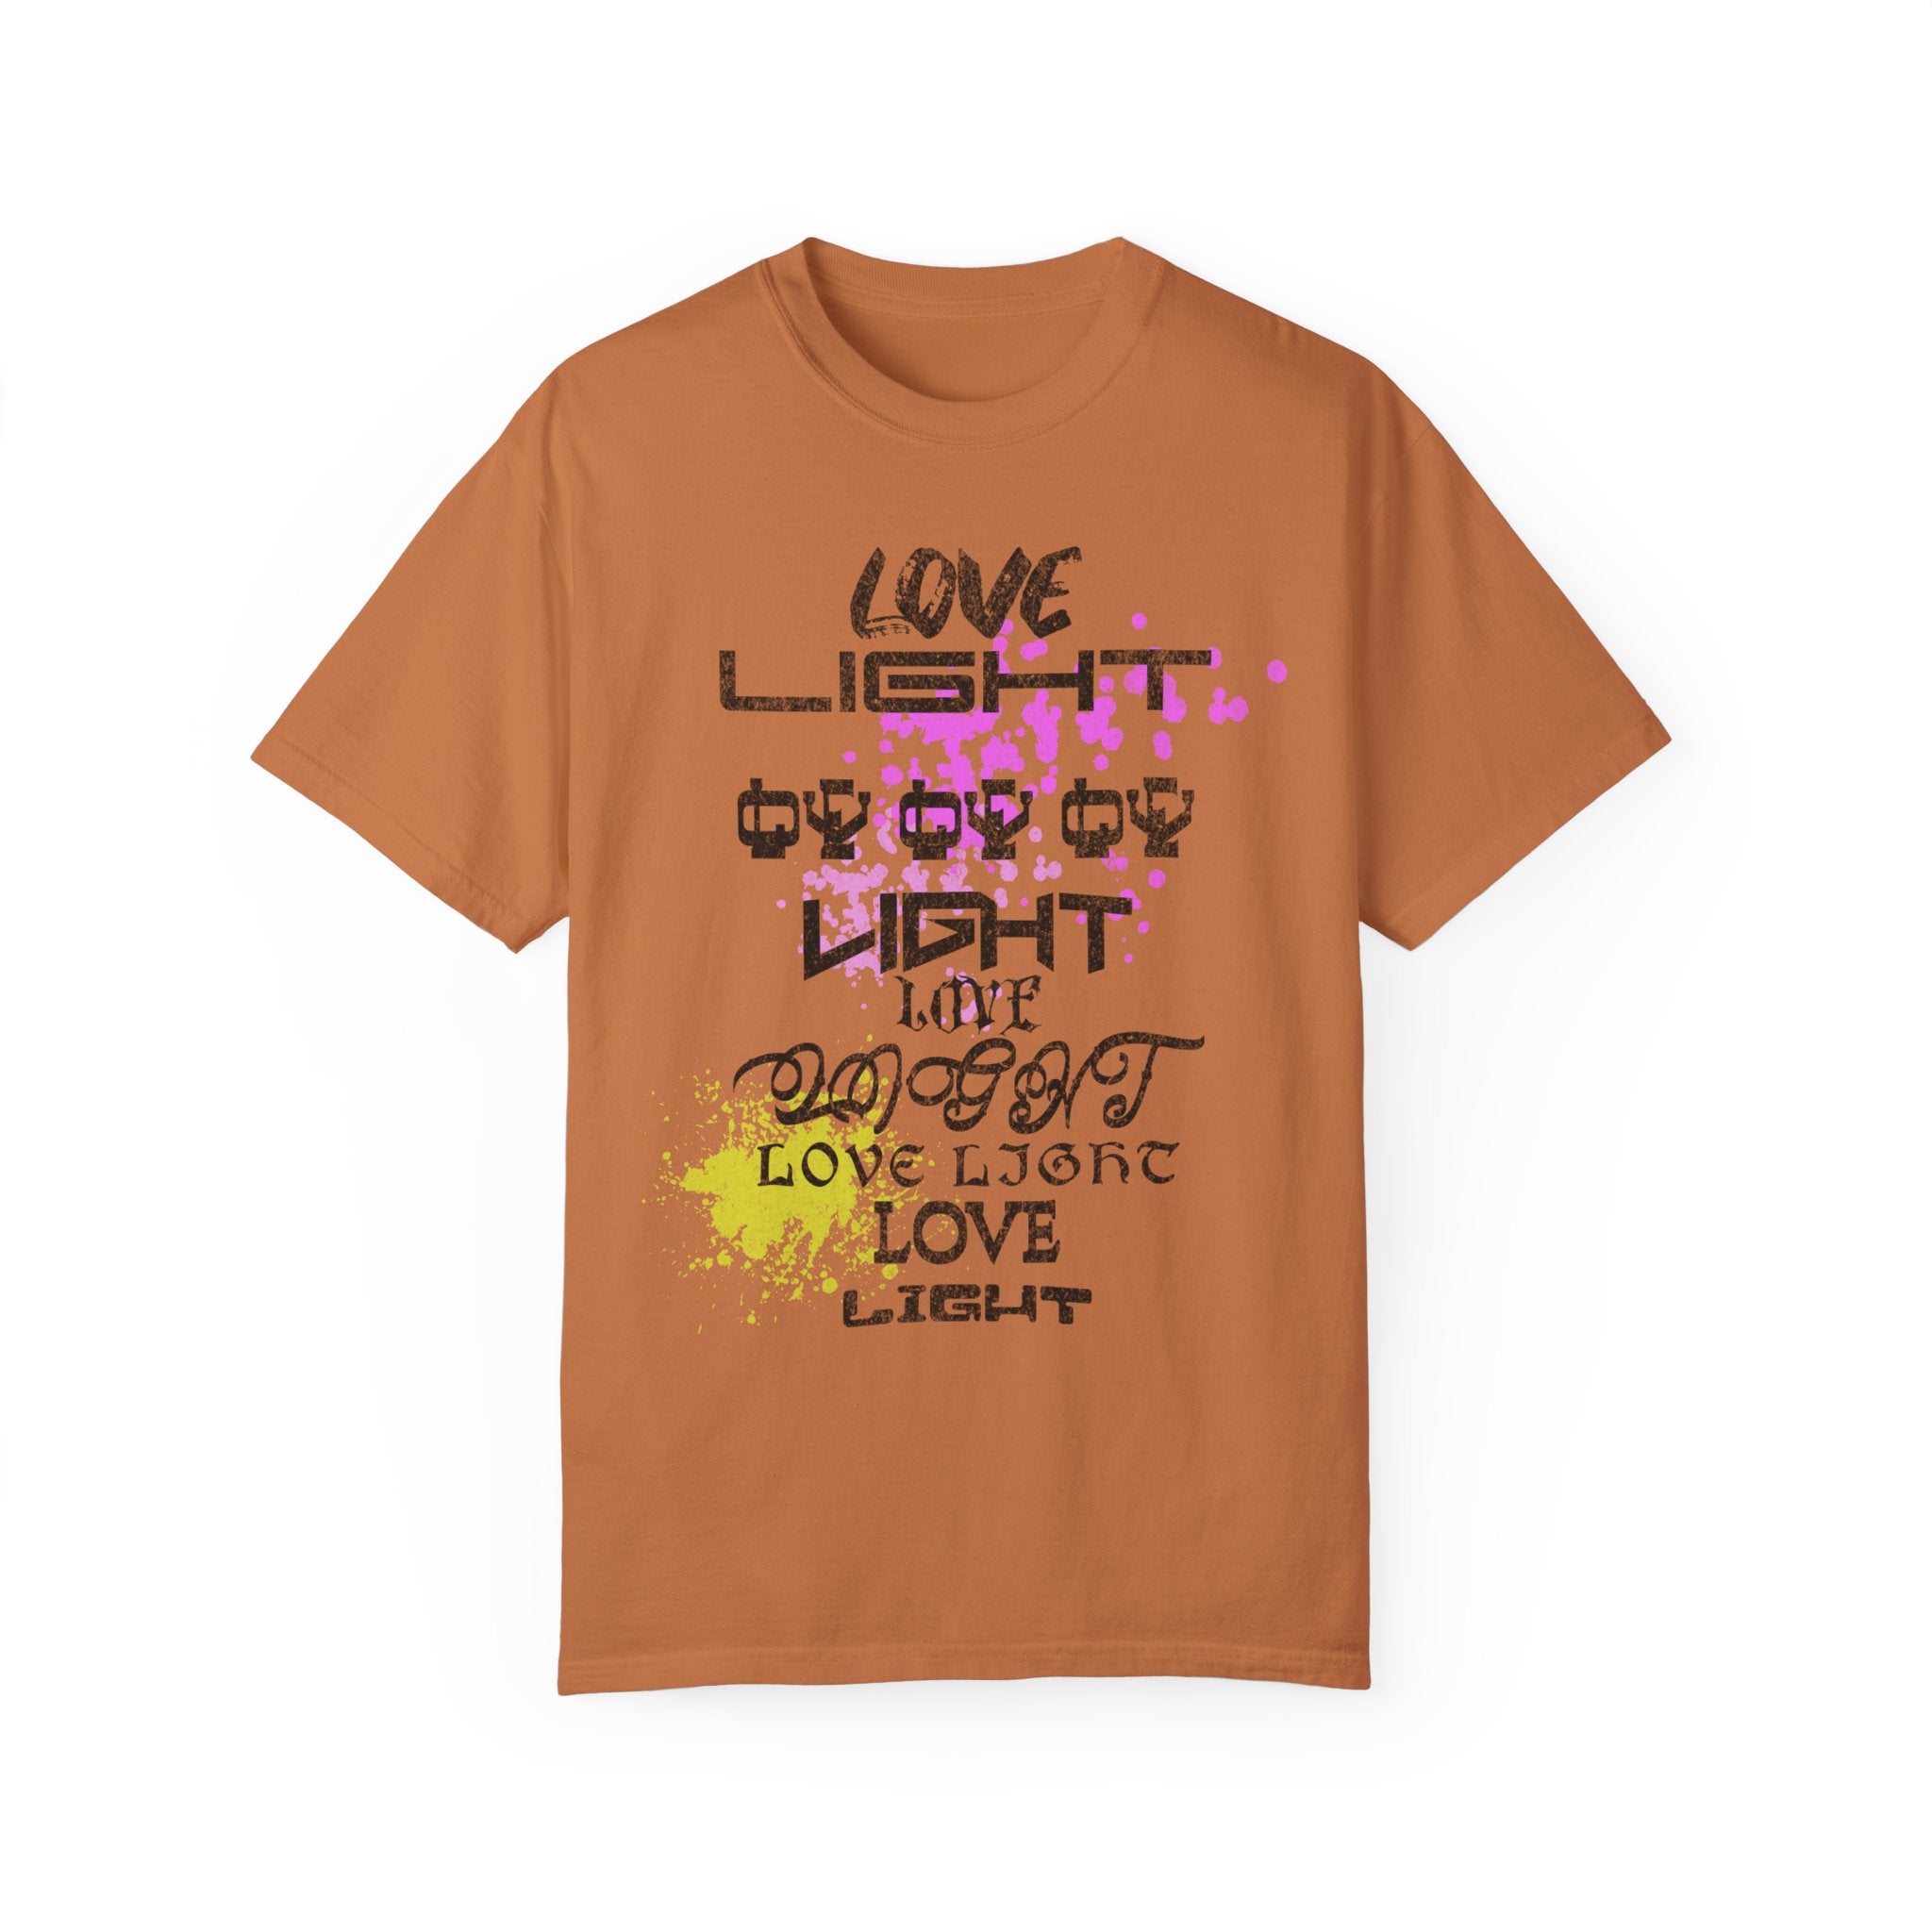 GOLDxTEAL stylish and colorful Love and Light  graphic t-shirt.